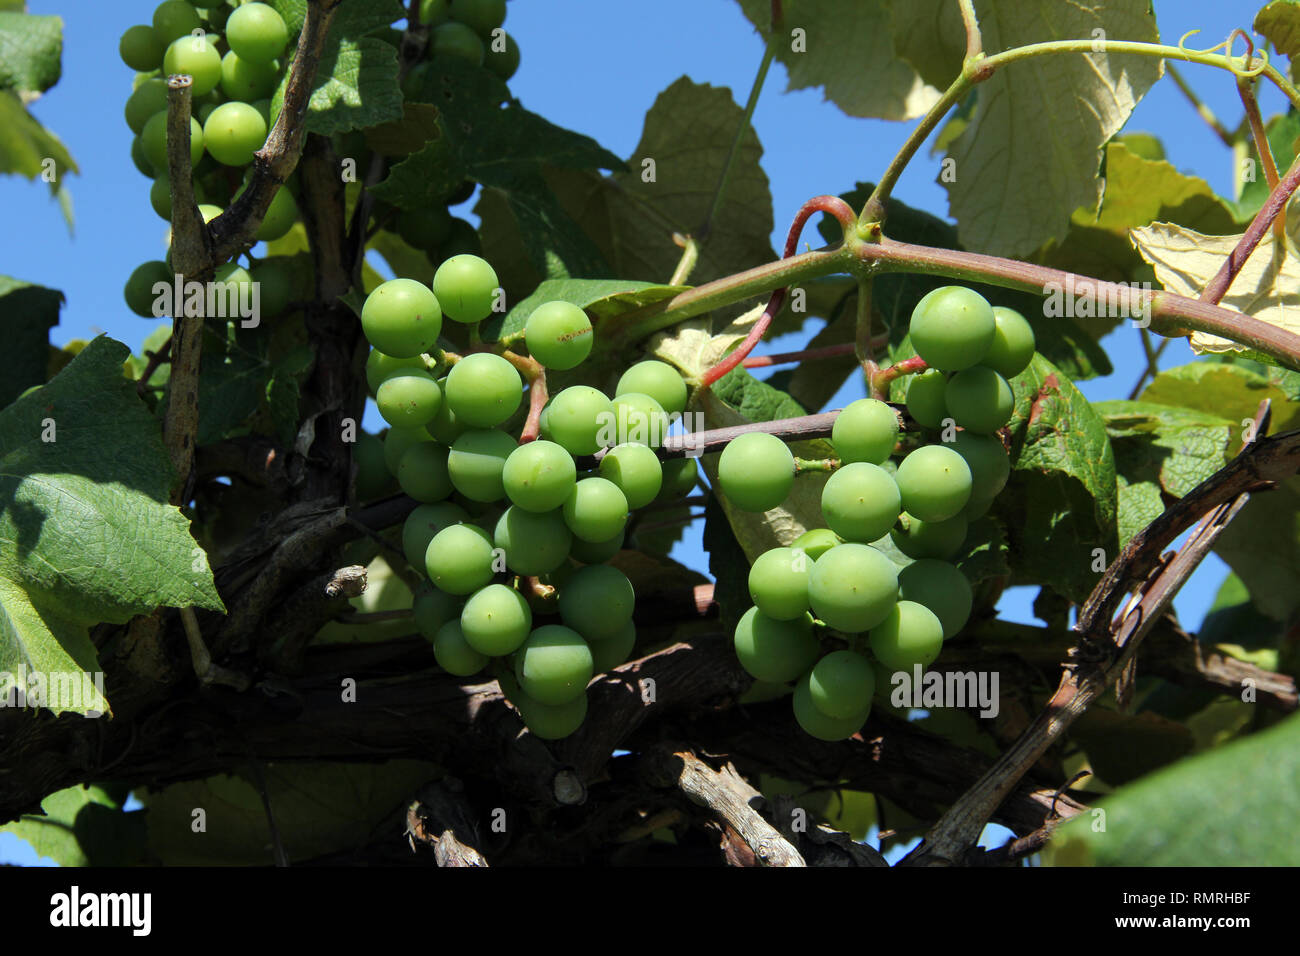 Green unripe grapes growing in a Vinyard Stock Photo